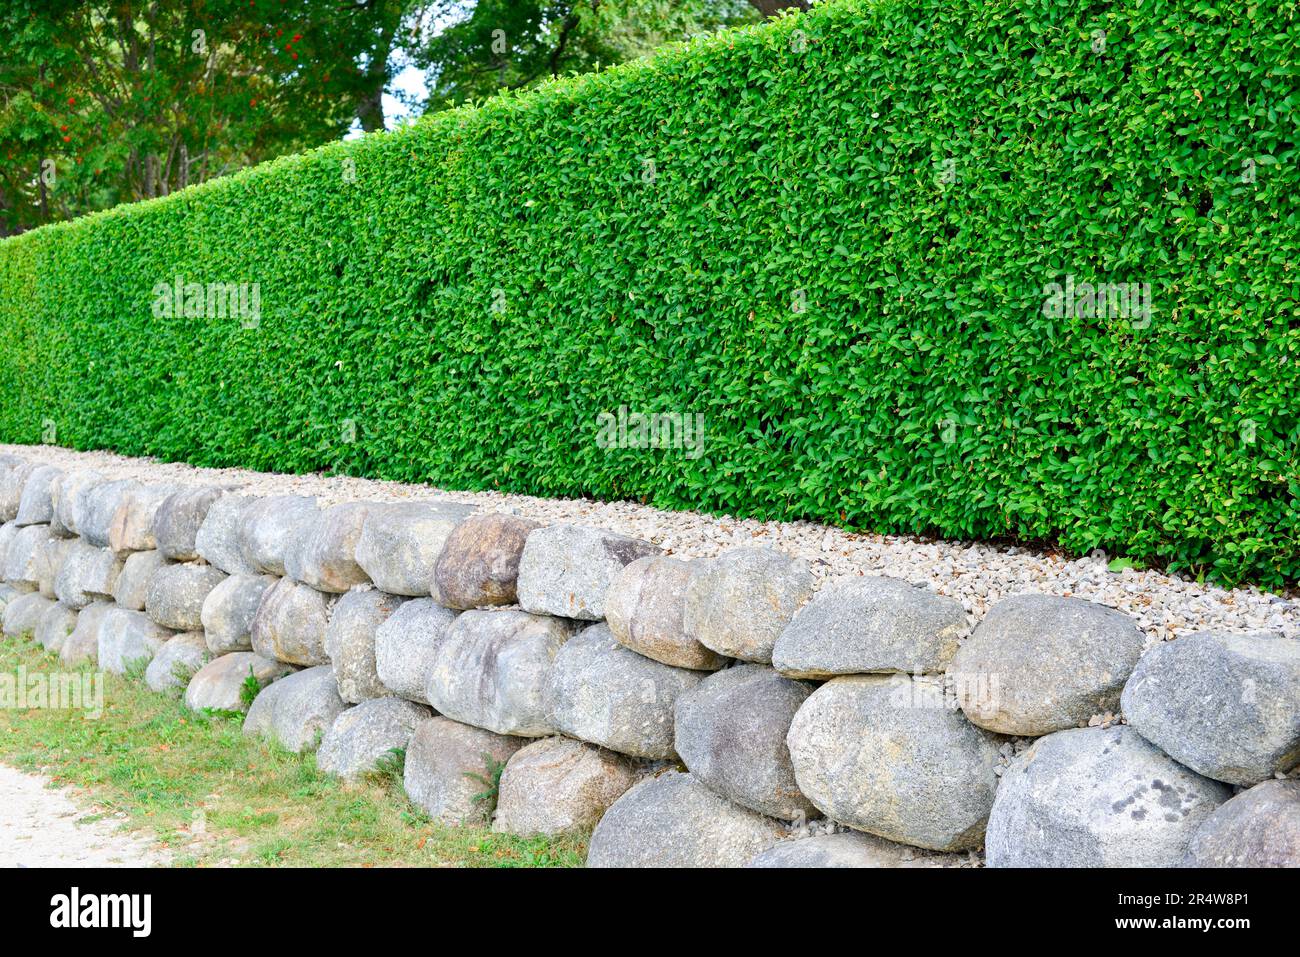 A vibrant green tall tree wall fence with stone or rock planter base, bush or shrub hedge trimming. A Siamese rough bush trimmed in a box shape. Stock Photo